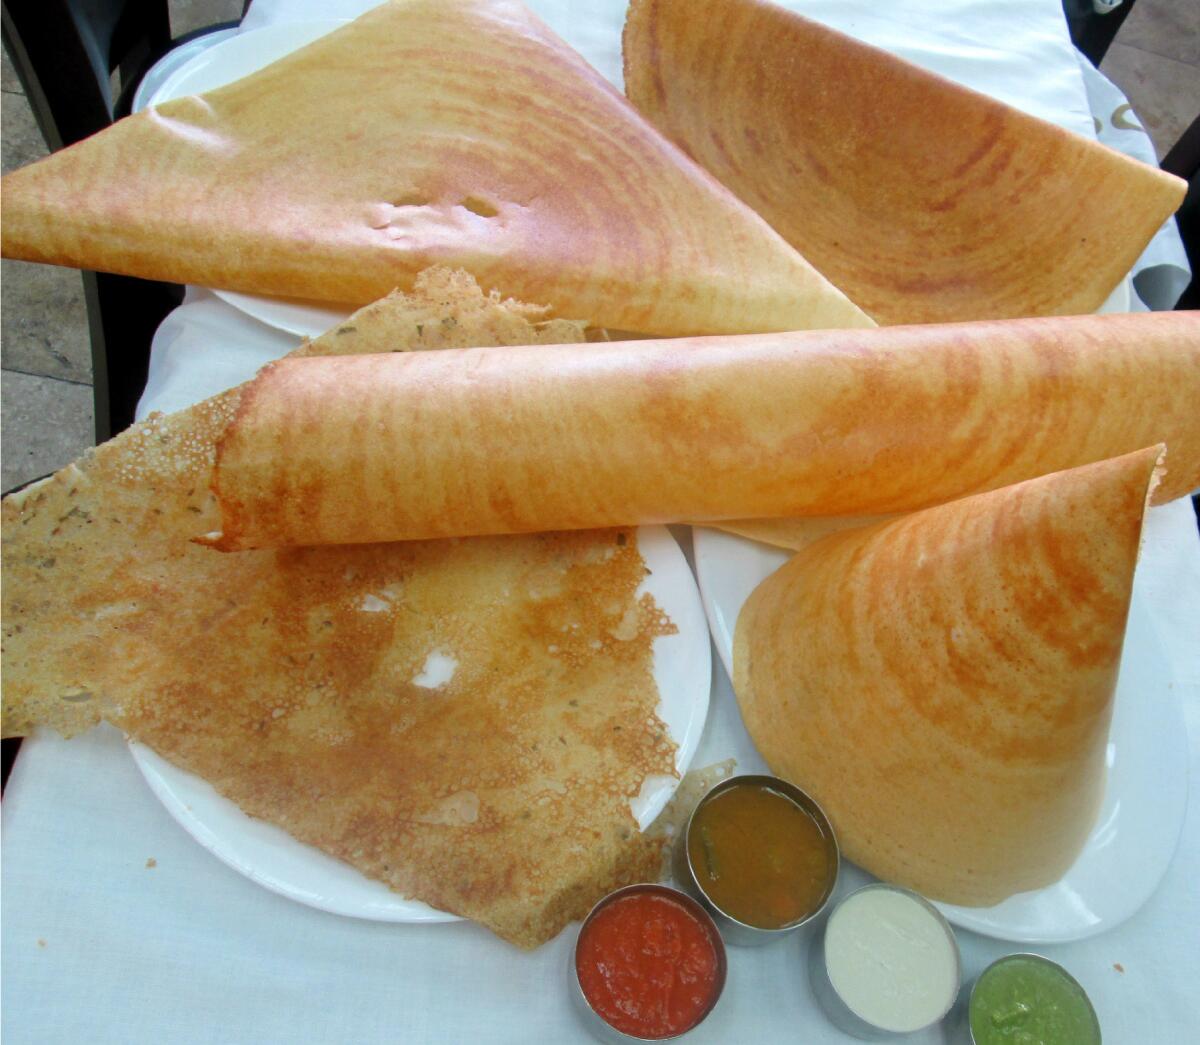 Chennai Dosa Corner in Artesia has many styles of dosas, crispy southern Indian crepes, at the 10-seat restaurant.